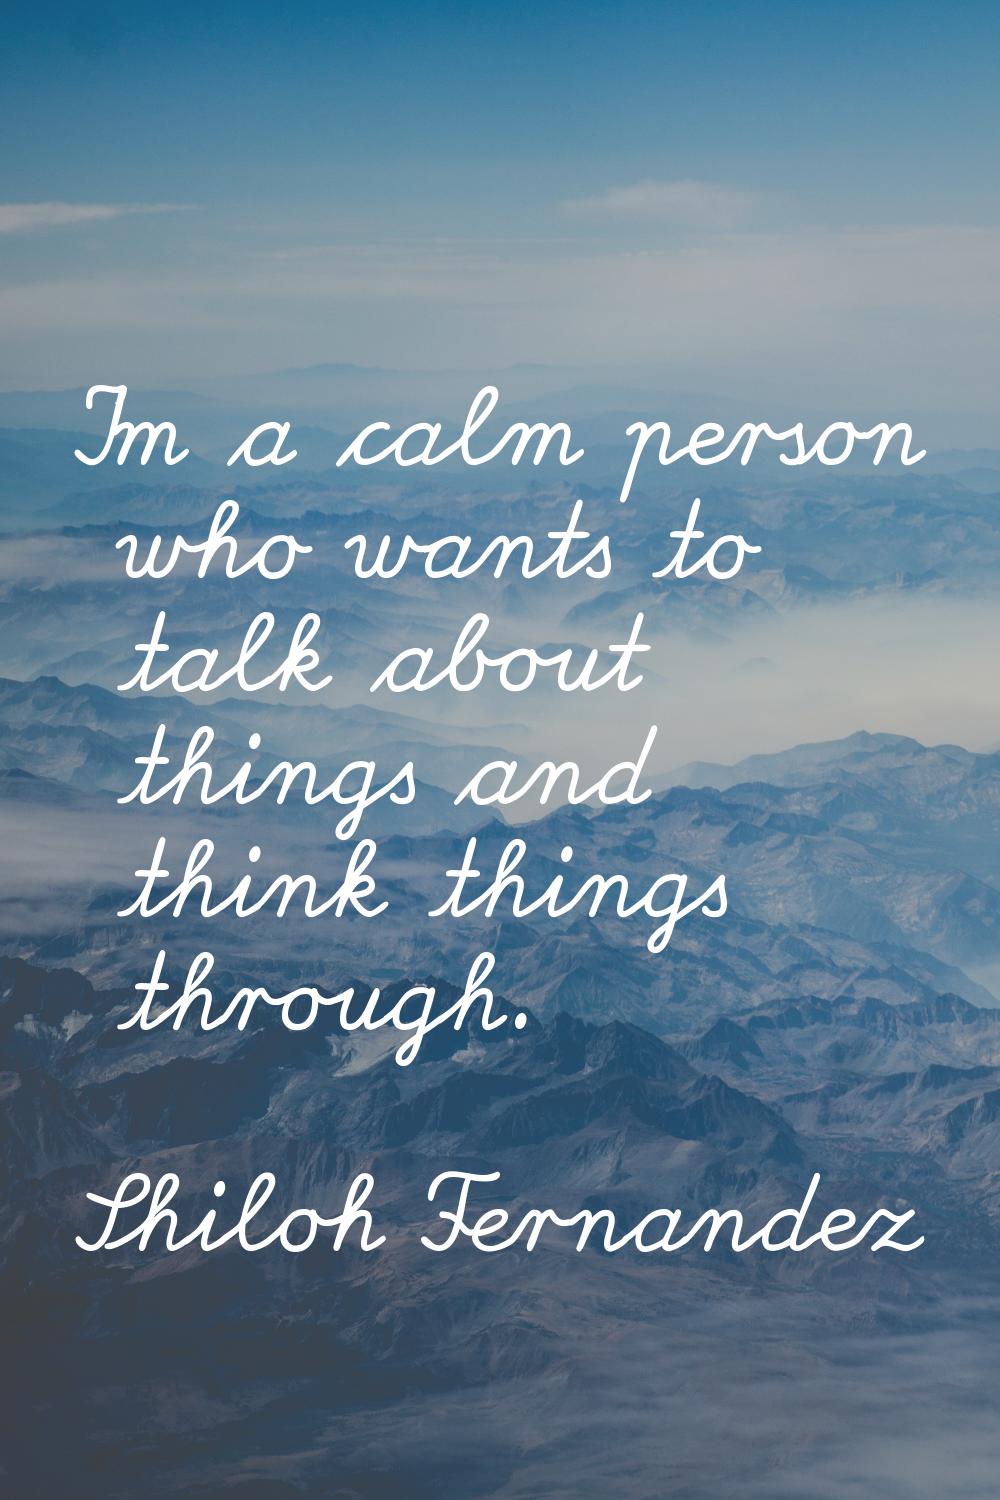 I'm a calm person who wants to talk about things and think things through.